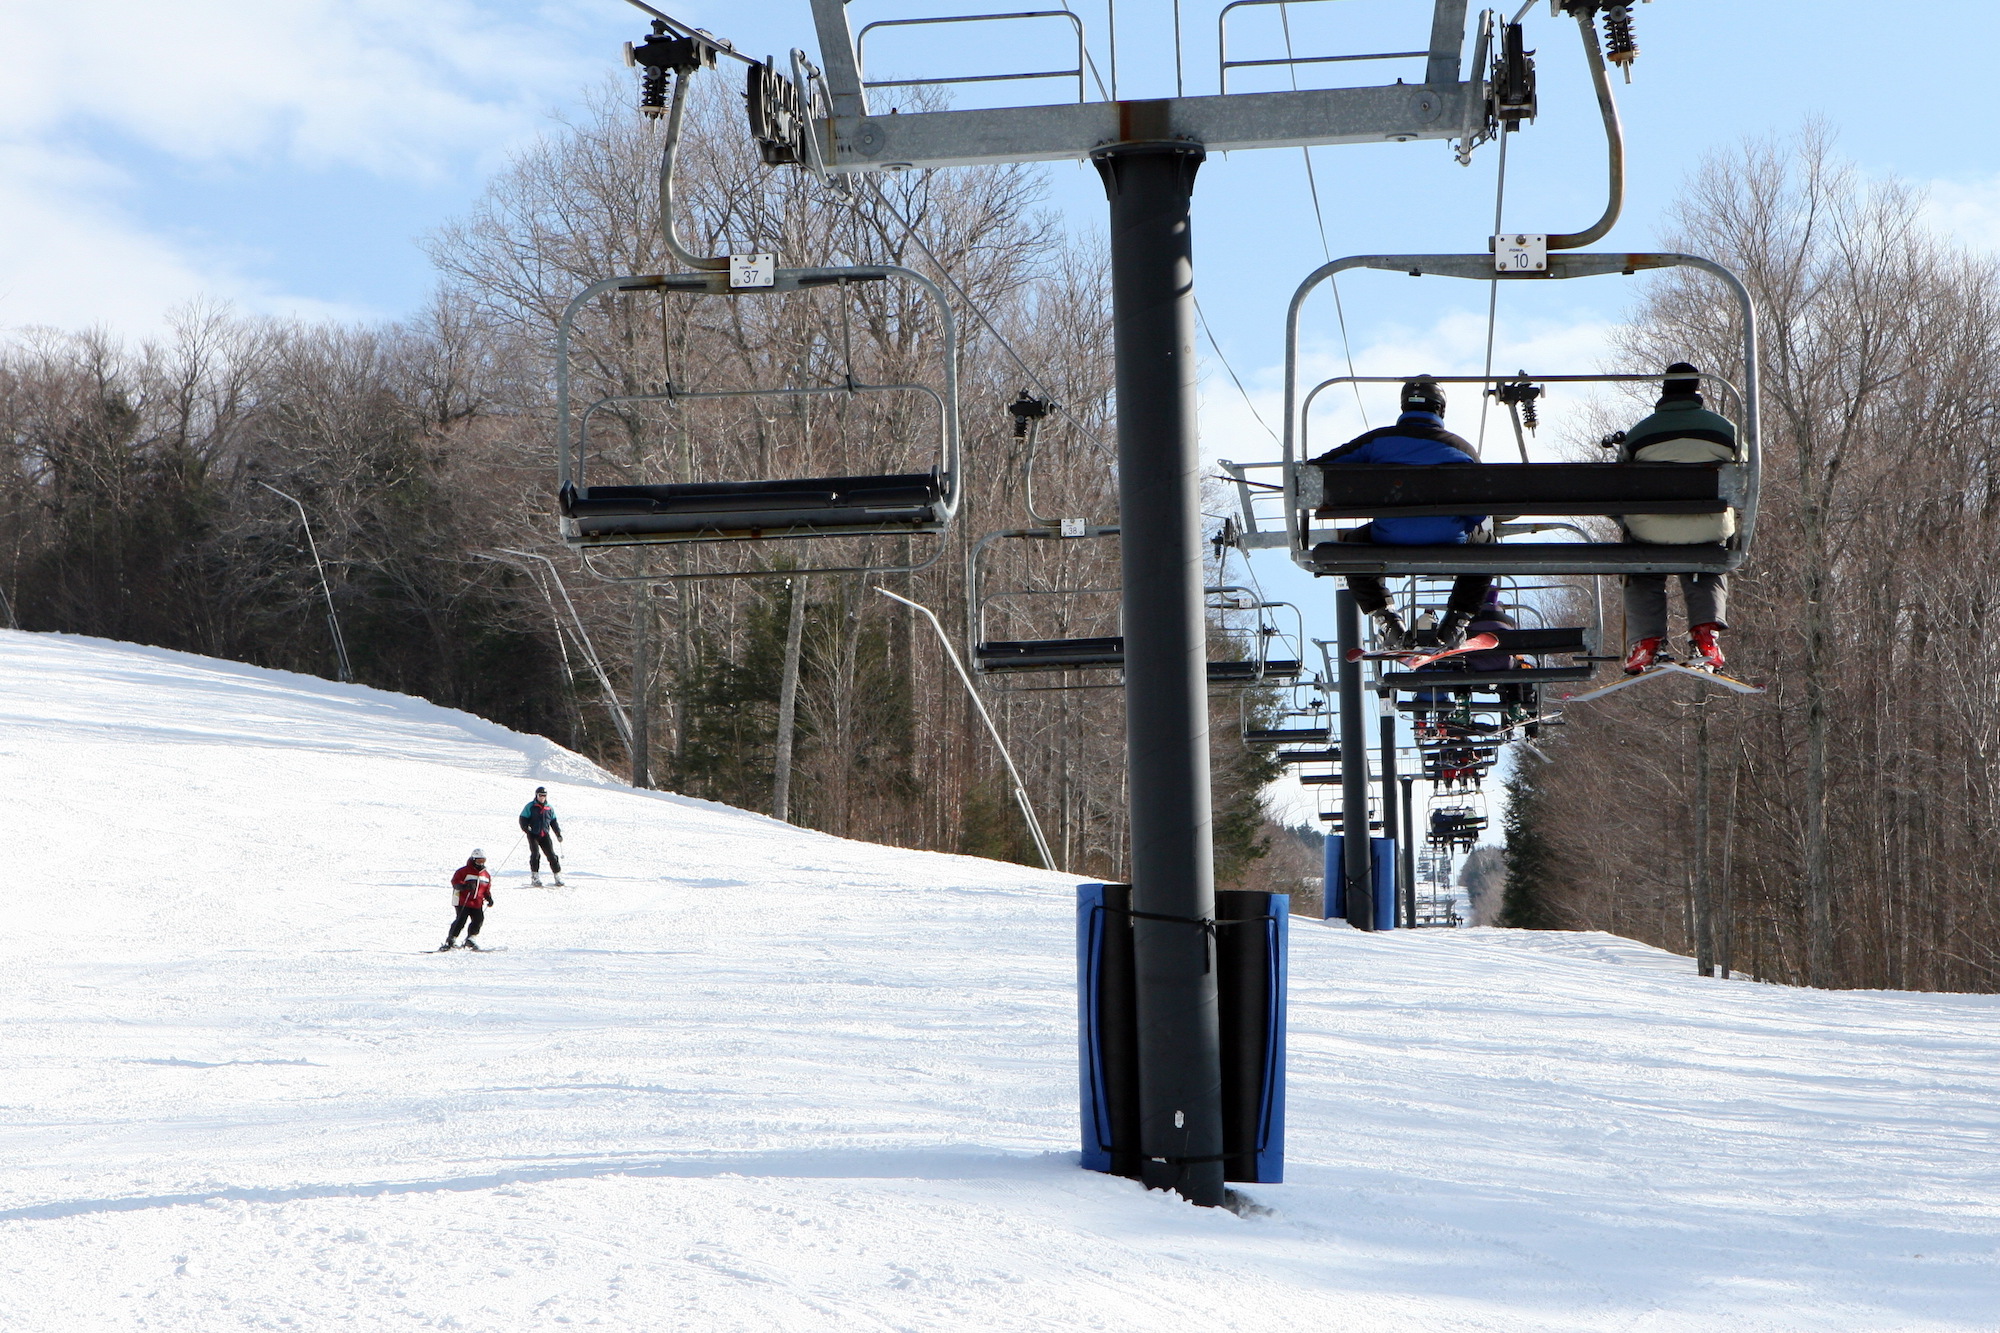 Skiing, Mad River Valley, Vermont, Pitcher Inn